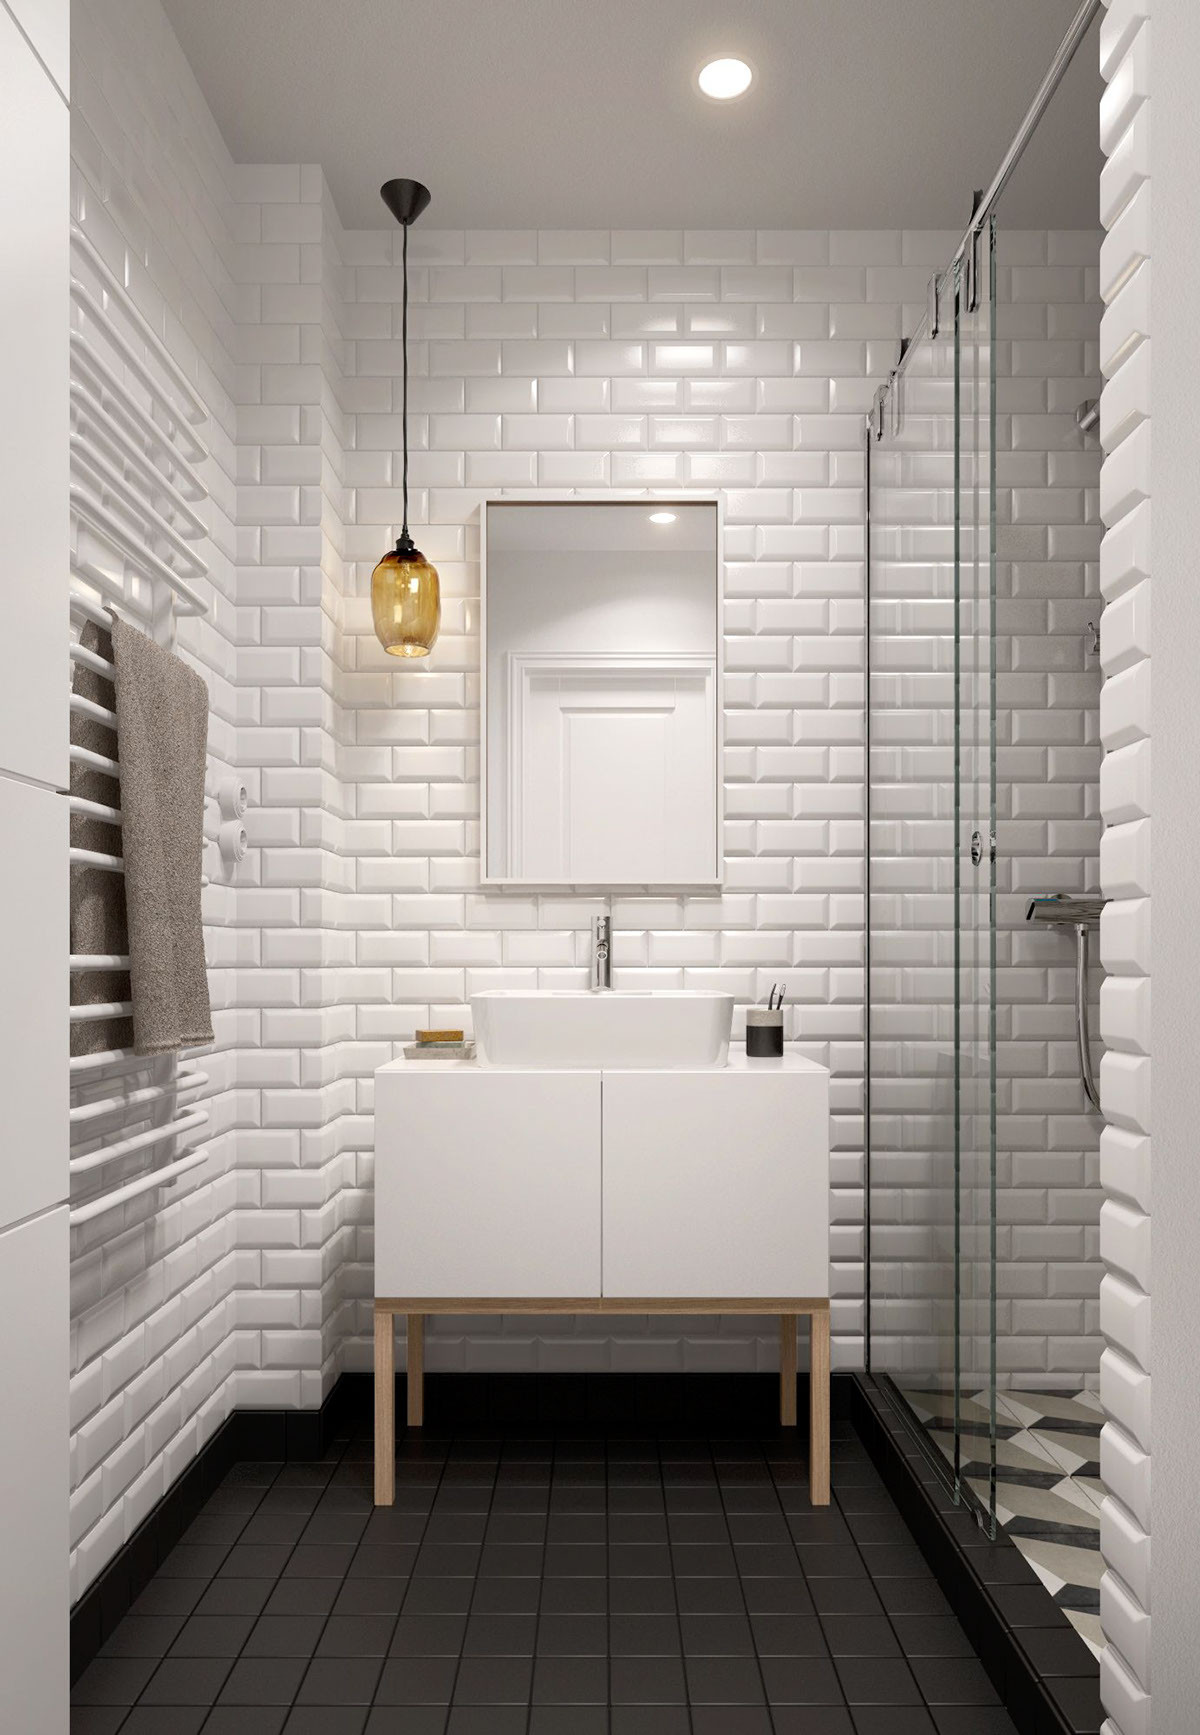 Bathroom Tile Wall
 A Midcentury Inspired Apartment with Scandinavian Tendencies